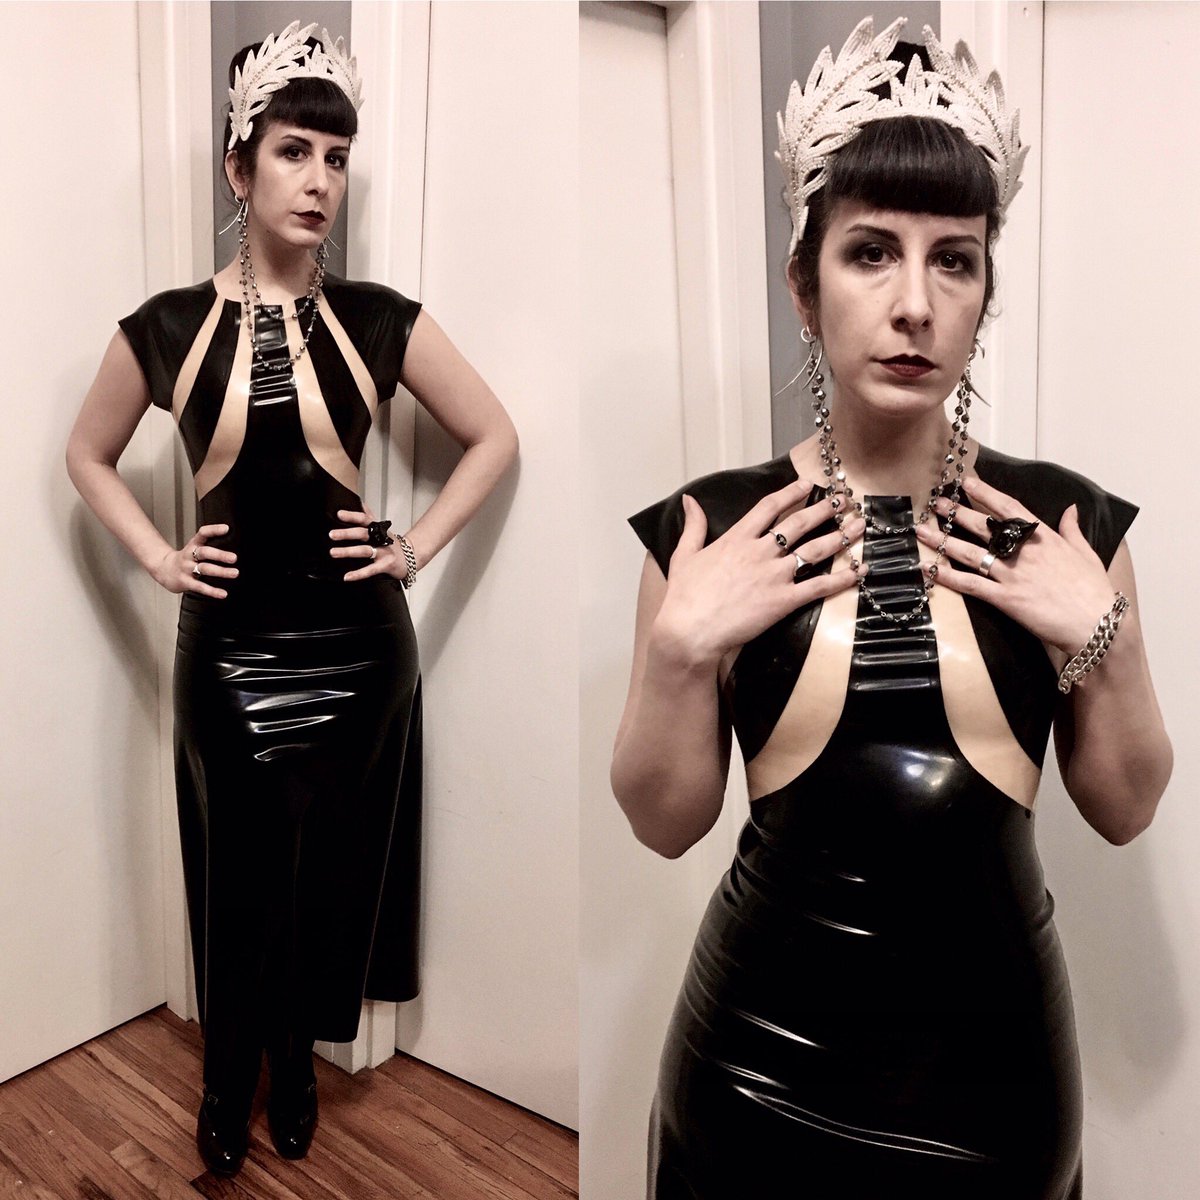 Forgot to plan an outfit for tonight, we are meeting up with friends, lucky there is this new design. In love with this piece might end up in my wardrobe and not on the rack. #babyloveslatex dress, #vintageheadpiece, #viviennewestwood heels. #latexdesigner #latexdress